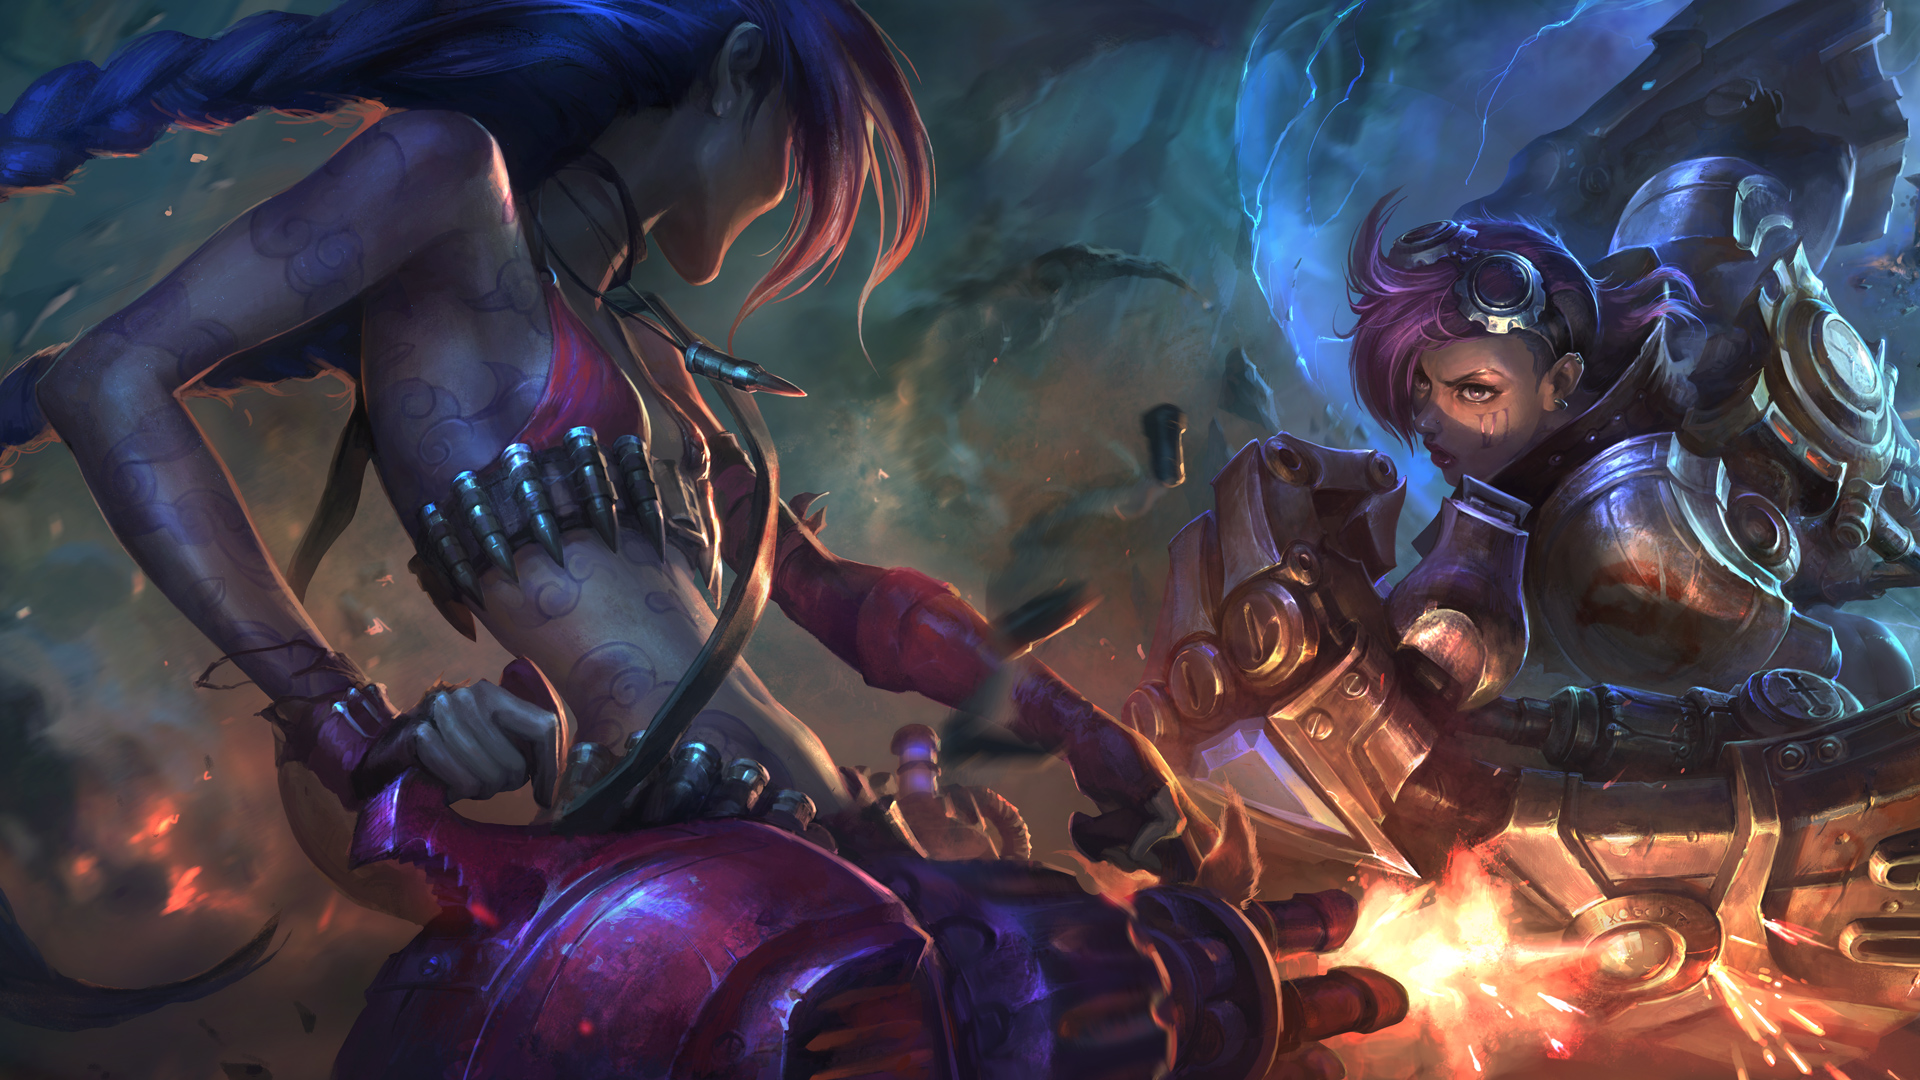 True Damage is this year's League of Legends musical group - The Rift Herald